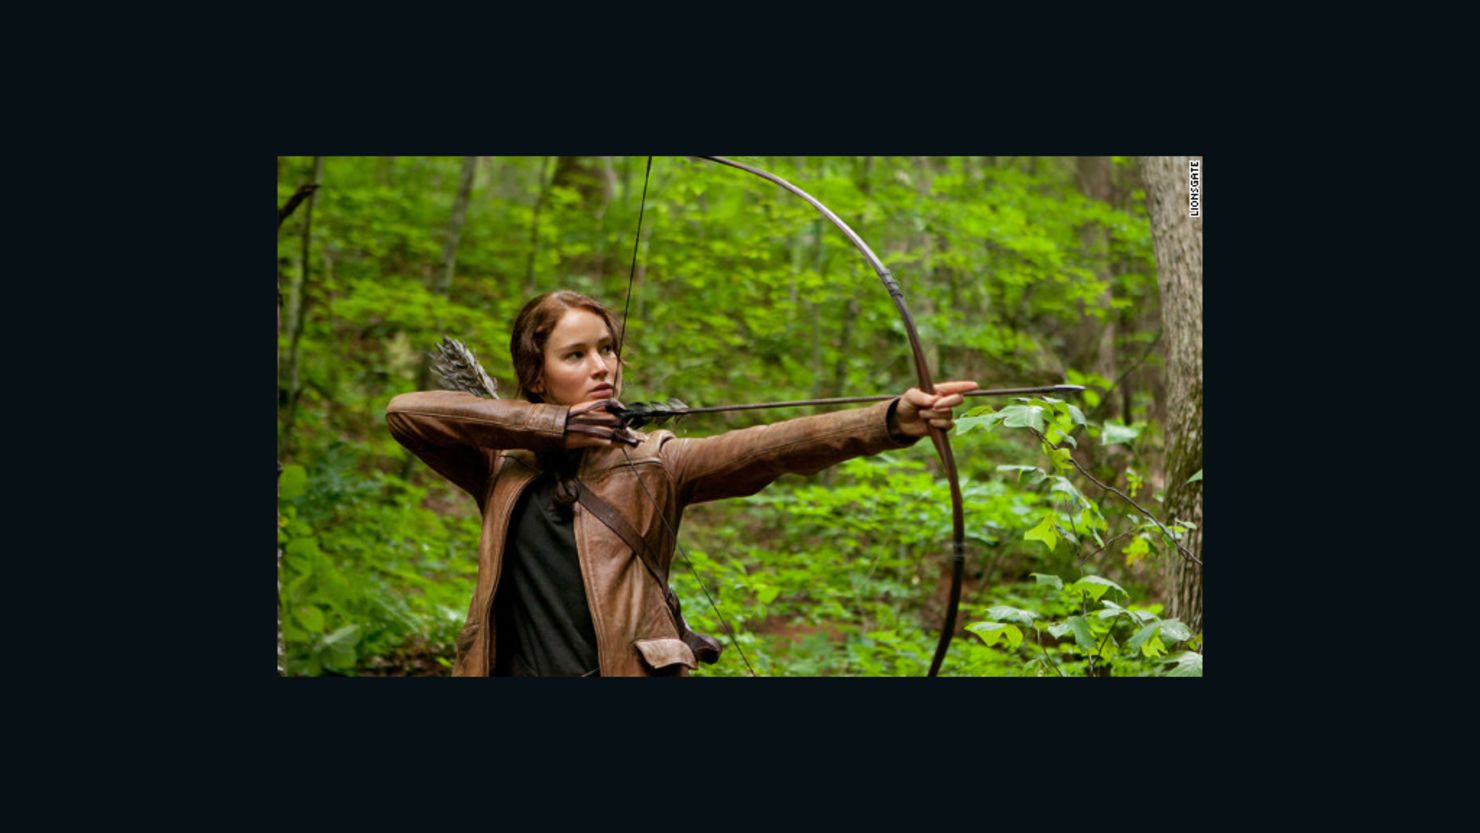 Like "The Hunger Games'" Katniss, played by Jennifer Lawrence, competitors on "The Hunt" will have to rely on survival skills.